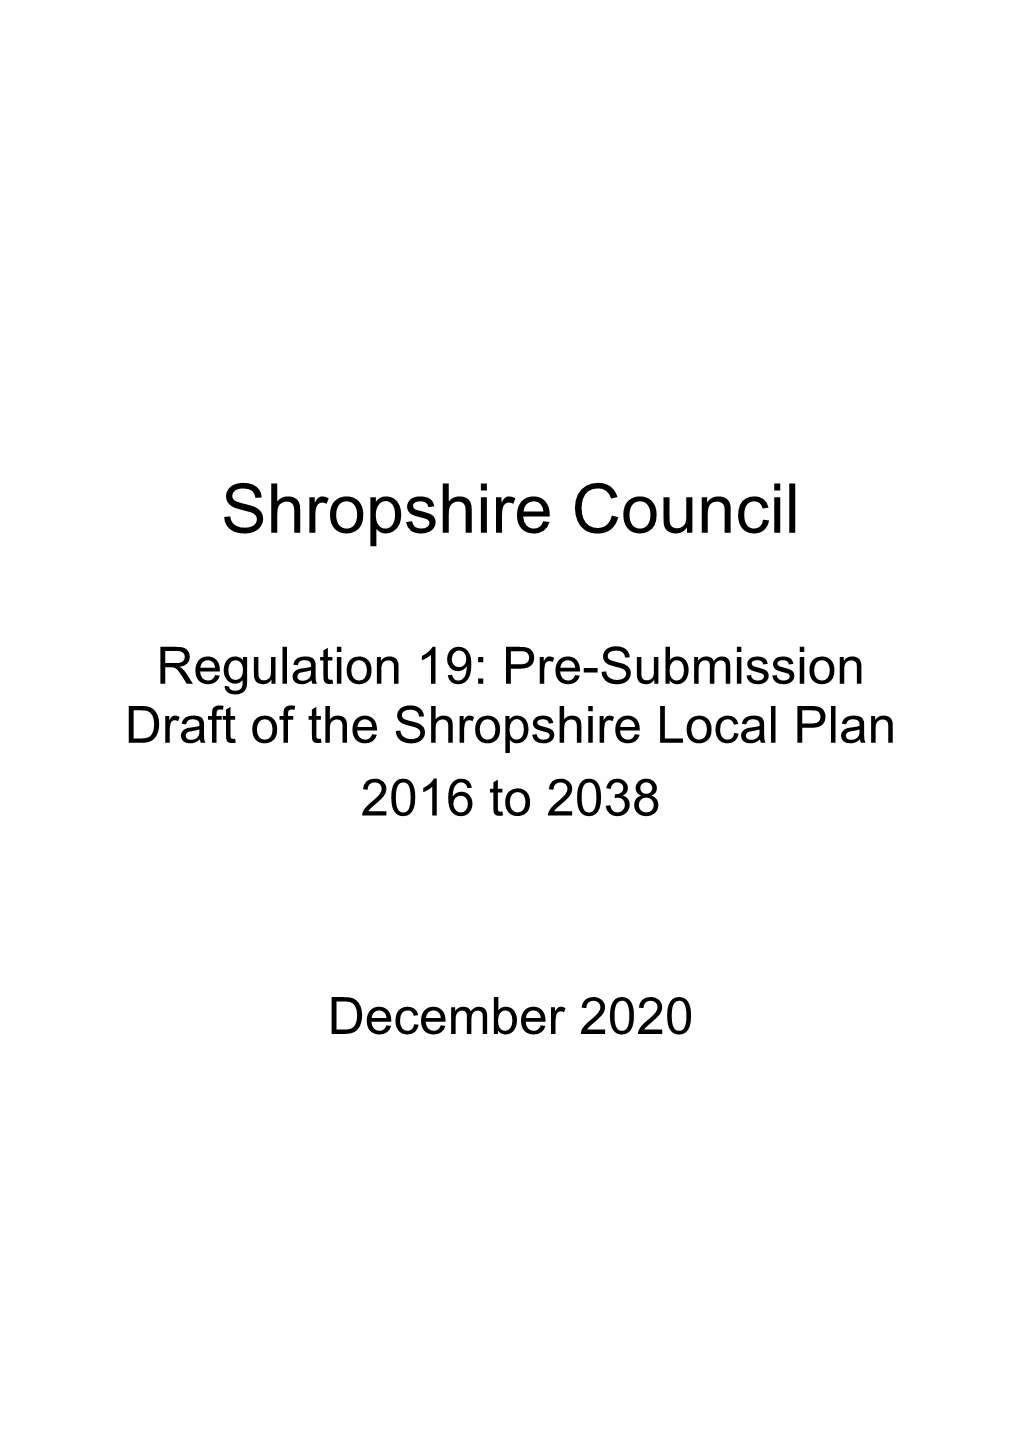 Regulation 19: Pre-Submission Draft of the Shropshire Local Plan 2016 to 2038